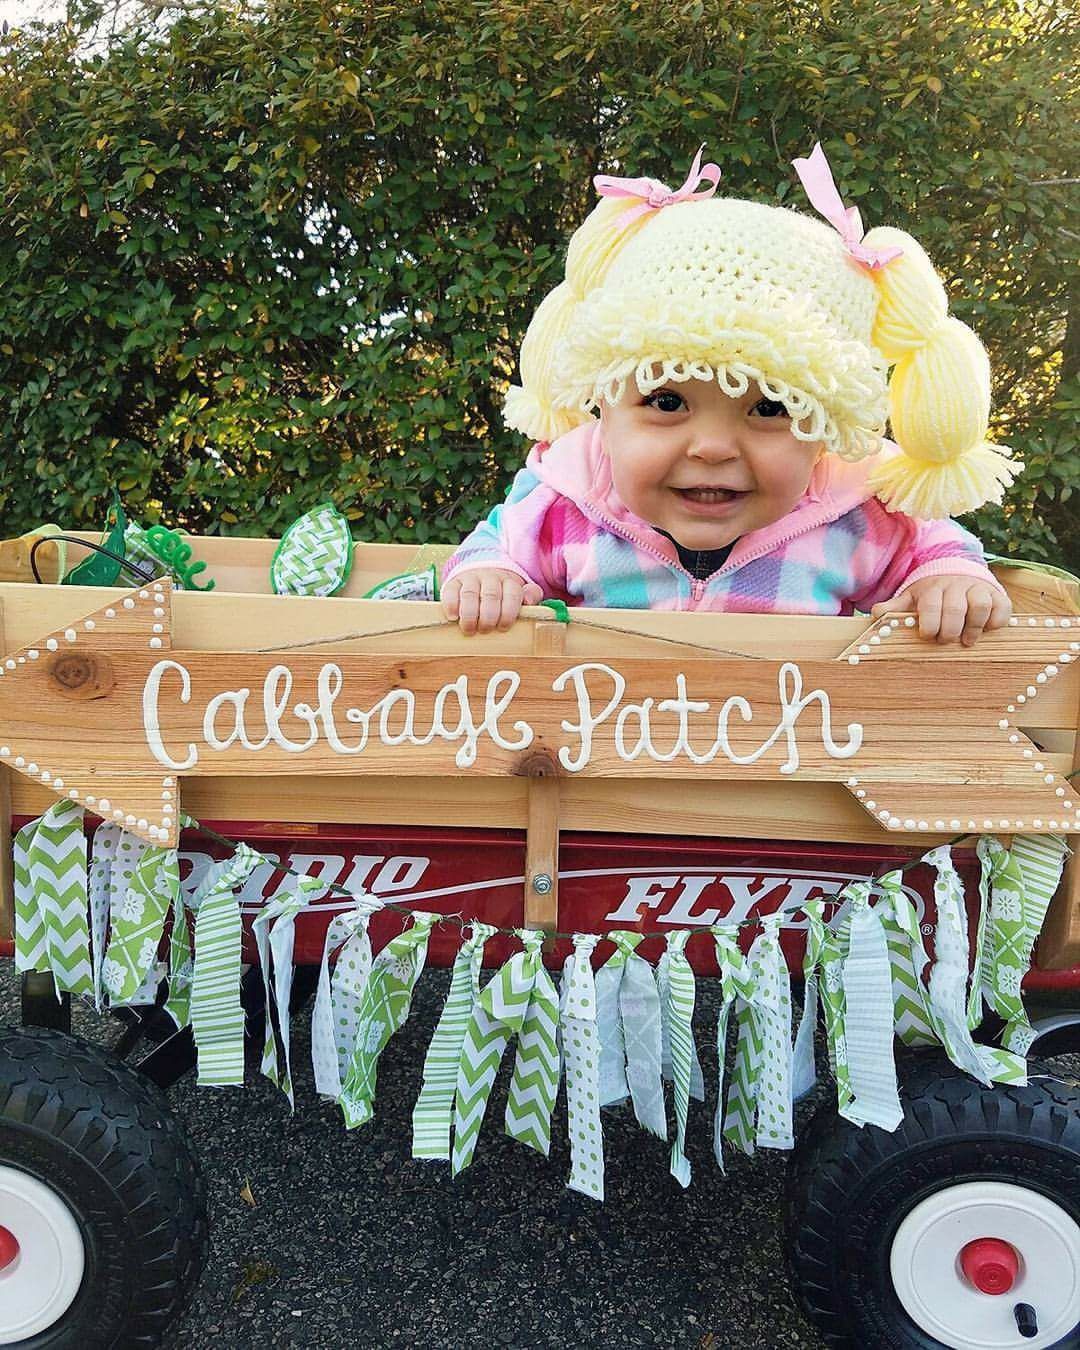 Halloween Costume Ideas For Babies In Carseats Strollers Or Other Cabbage